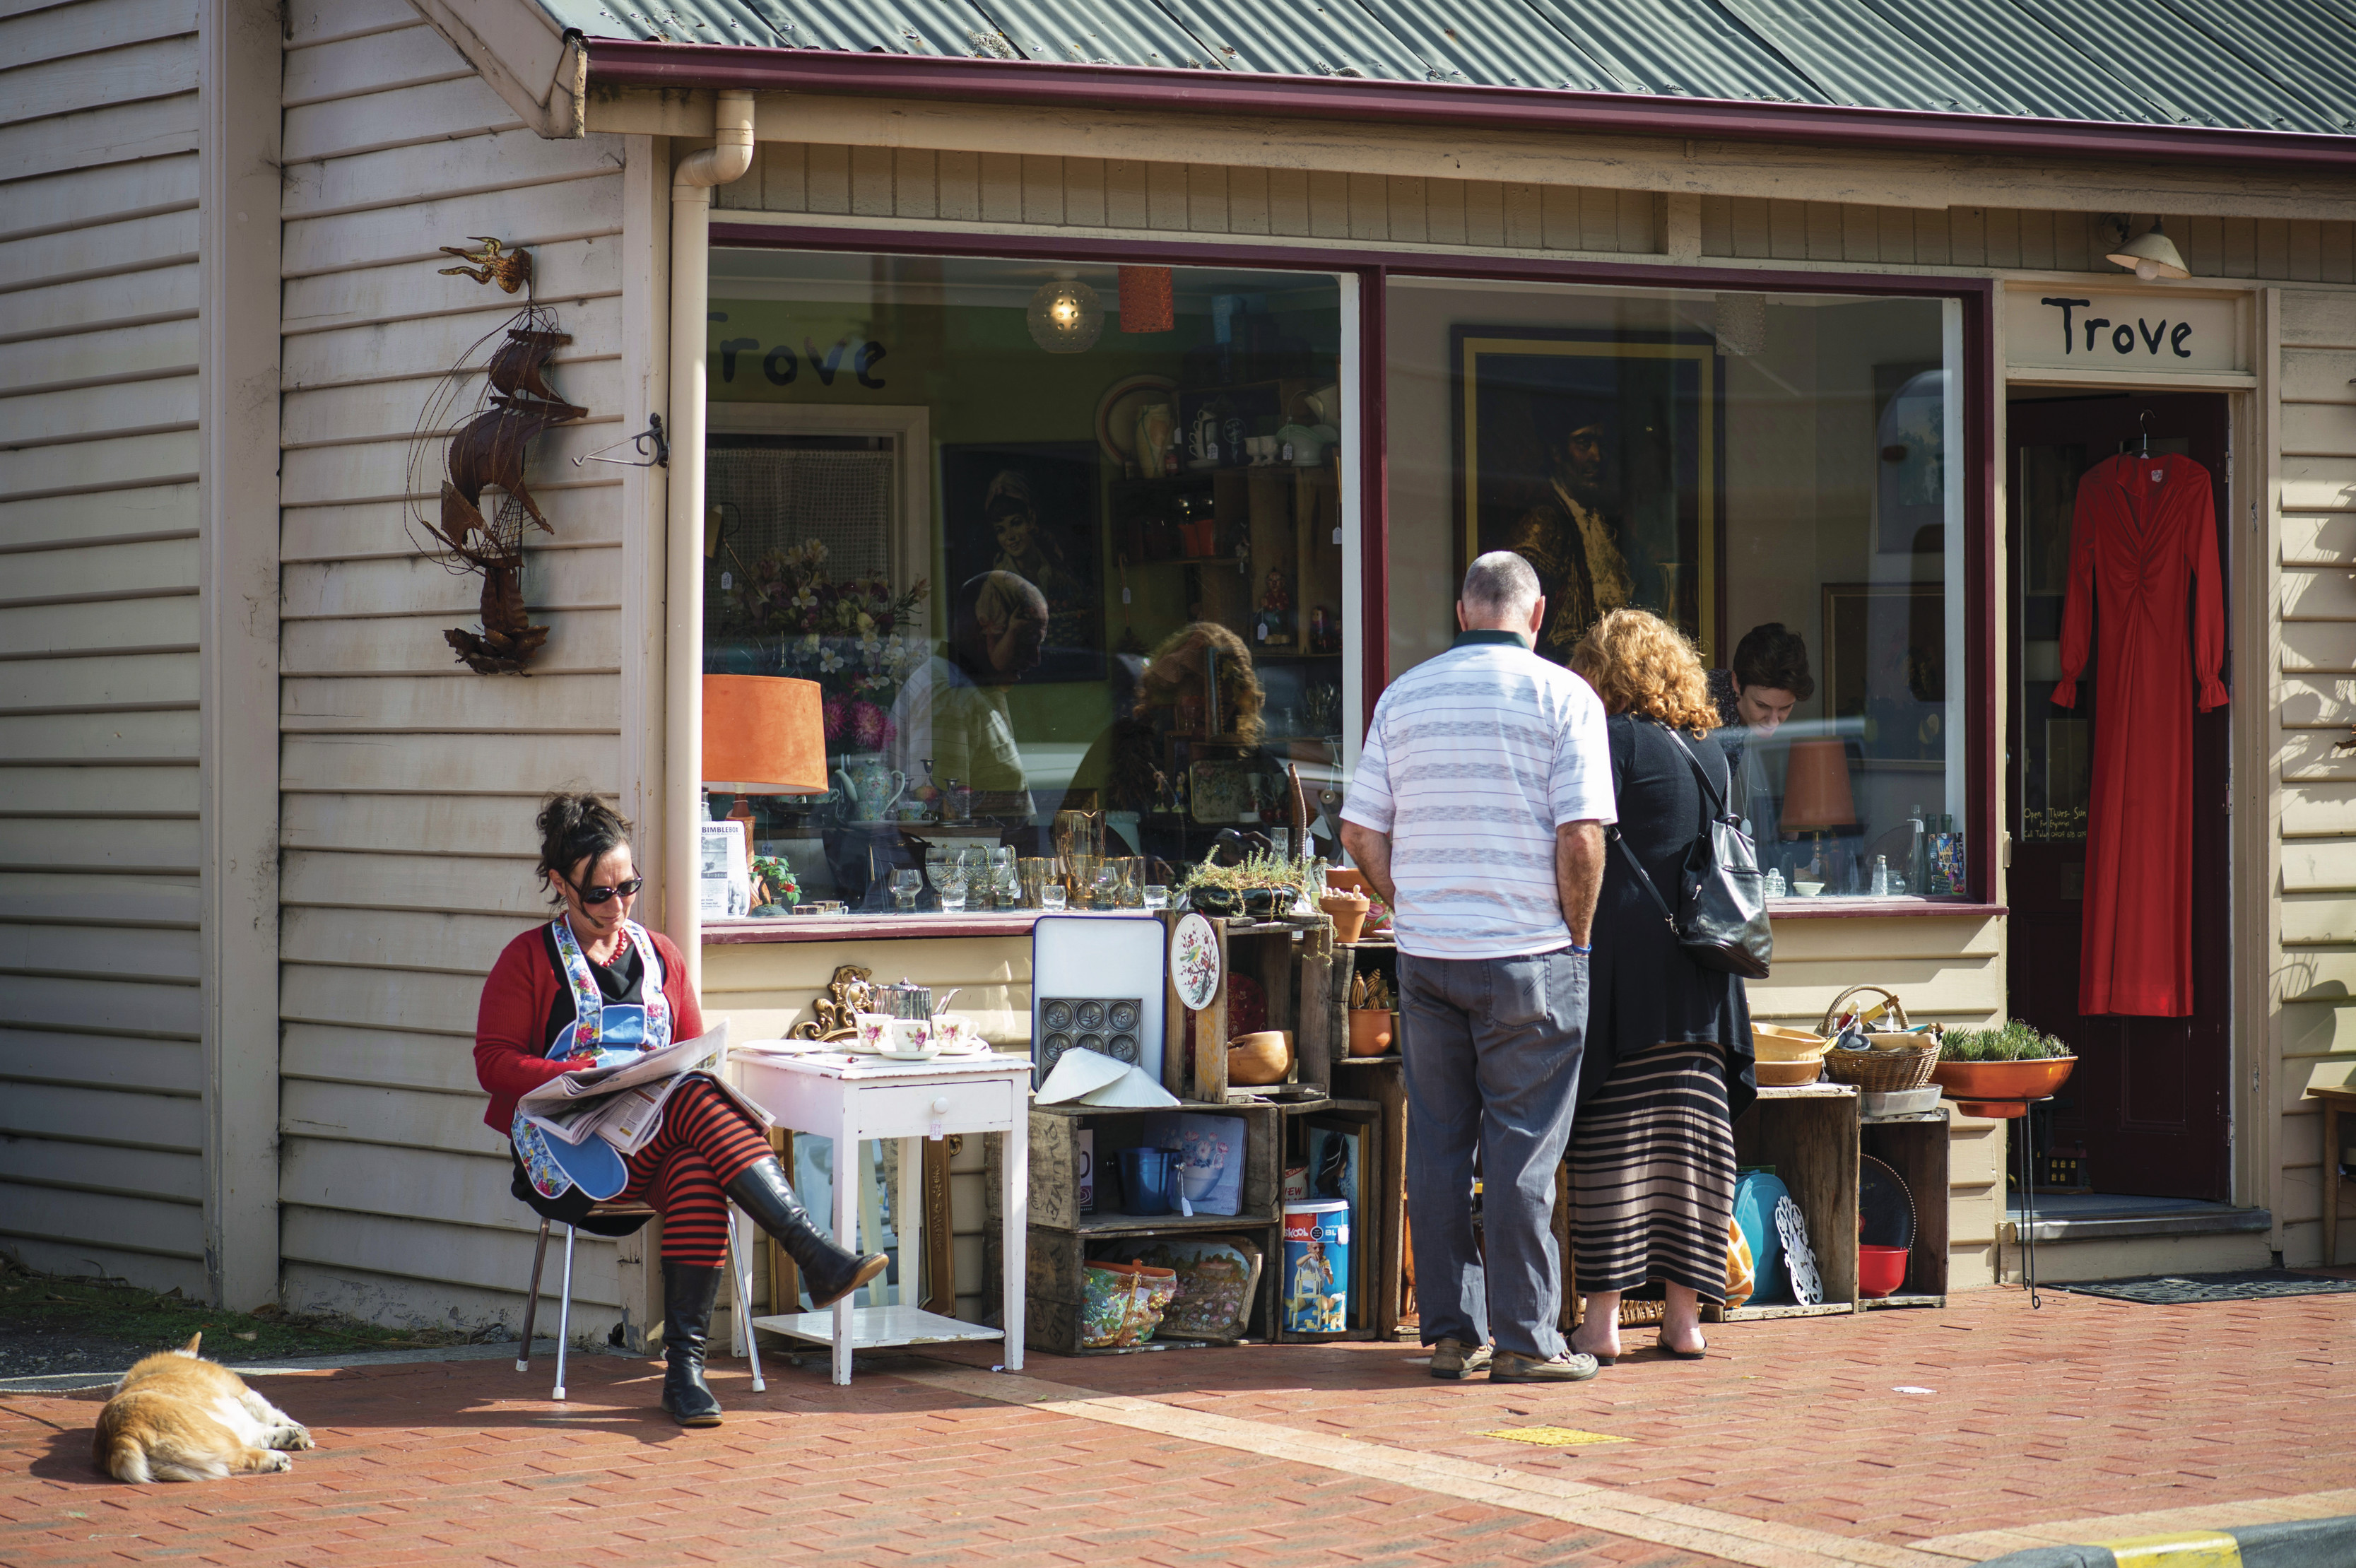 A couple browse the antiques and collectables outside Trove, a shop in Cygnet.